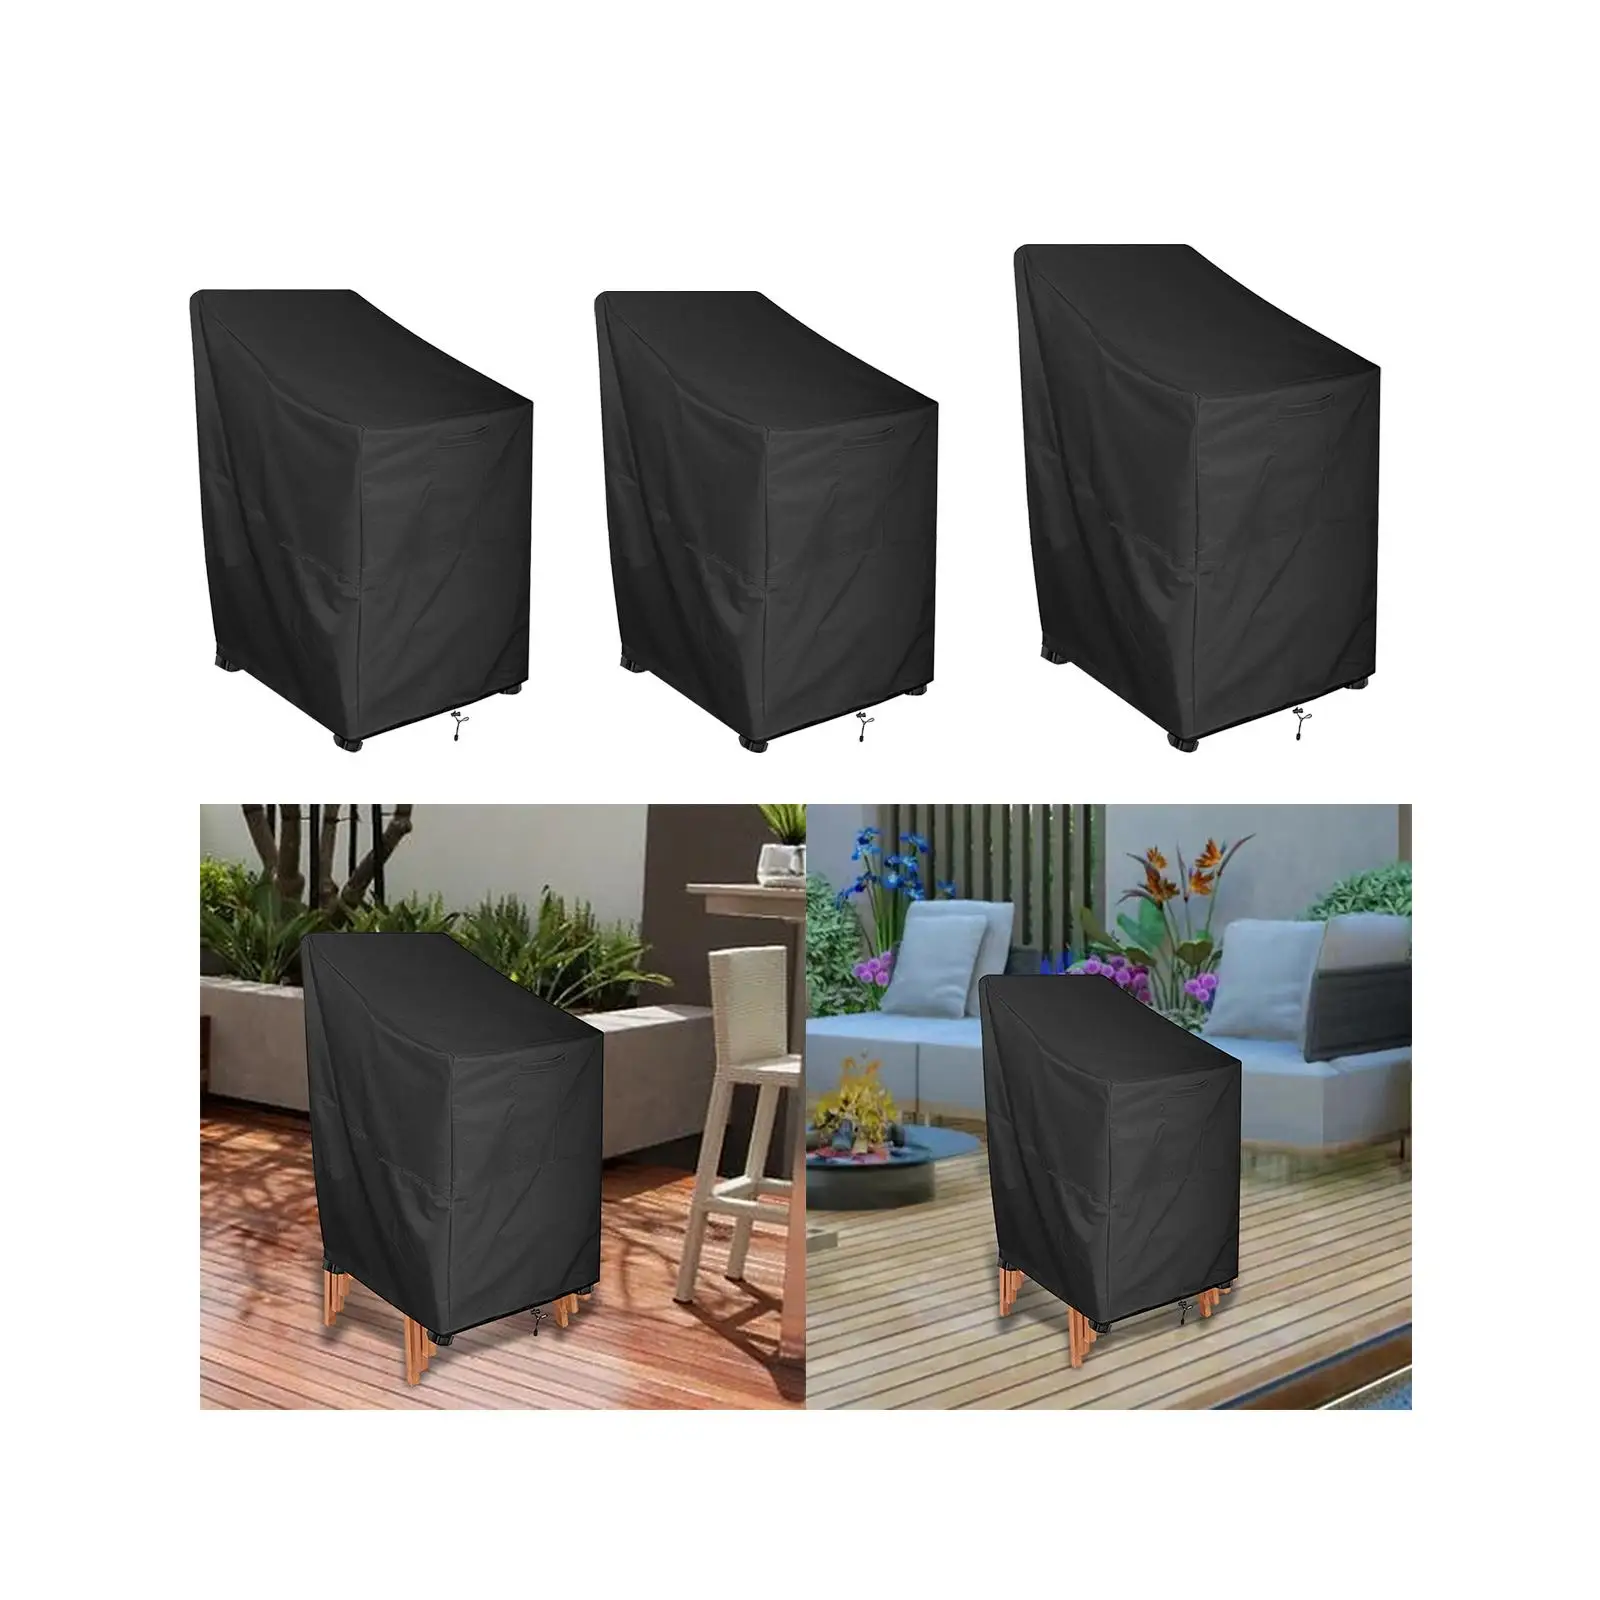 Folding Chairs Cover Durable Waterproof Dustproof Garden Patio Chair Cover